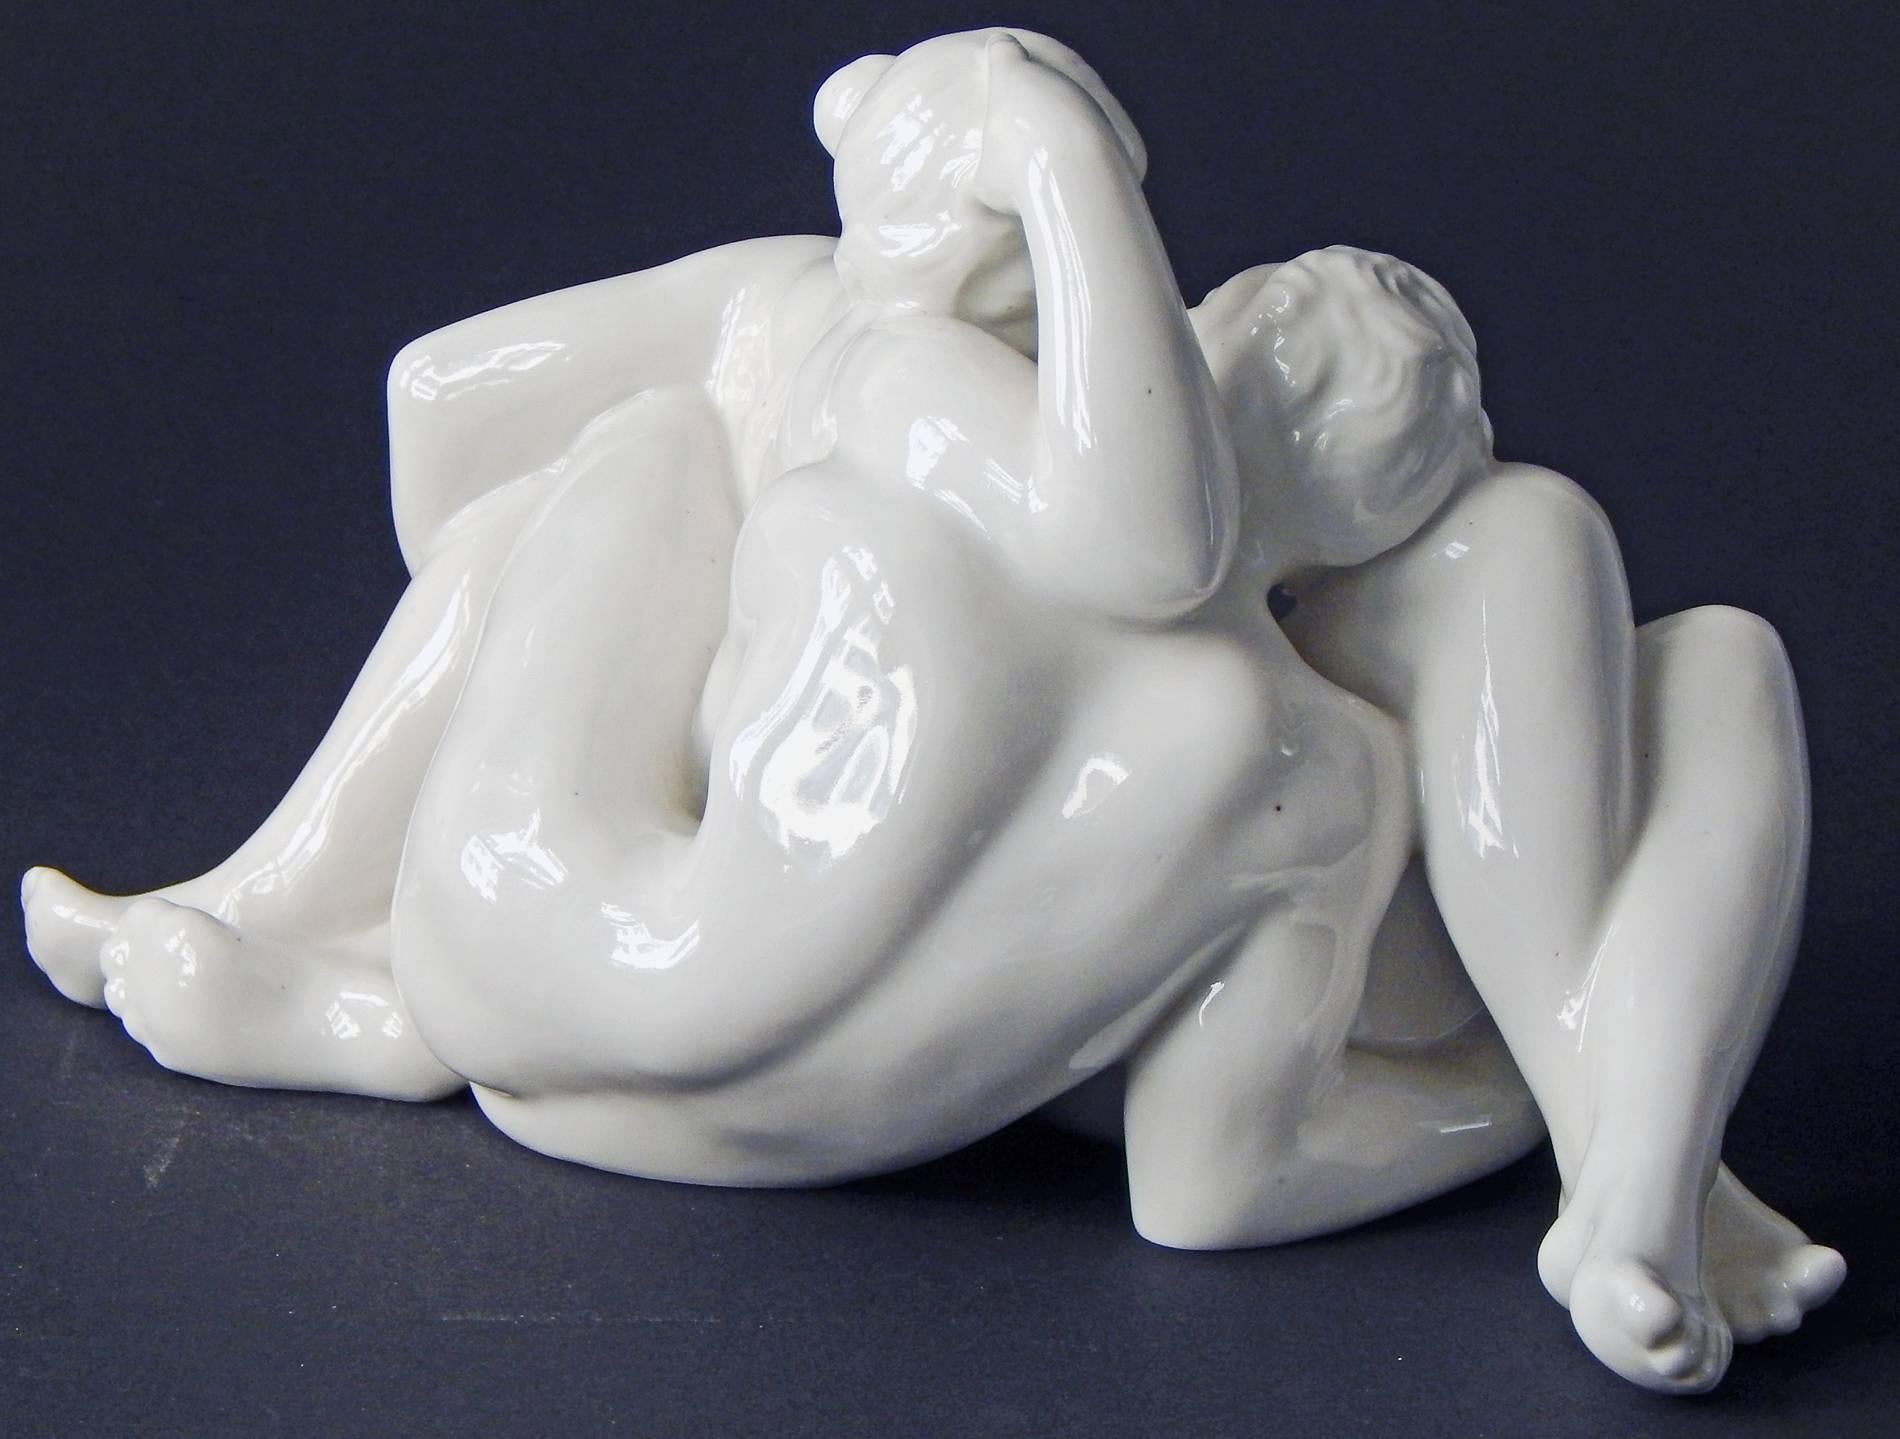 Sculpted by Jens Jakob Bregnoe for the famed Danish sculptor and porcelain designer, Jens Peter Dahl-Jensen, this rare piece depicts a nude male and female intertwined couple that is about to kiss. The figure is fully glazed in a glossy, liquidy